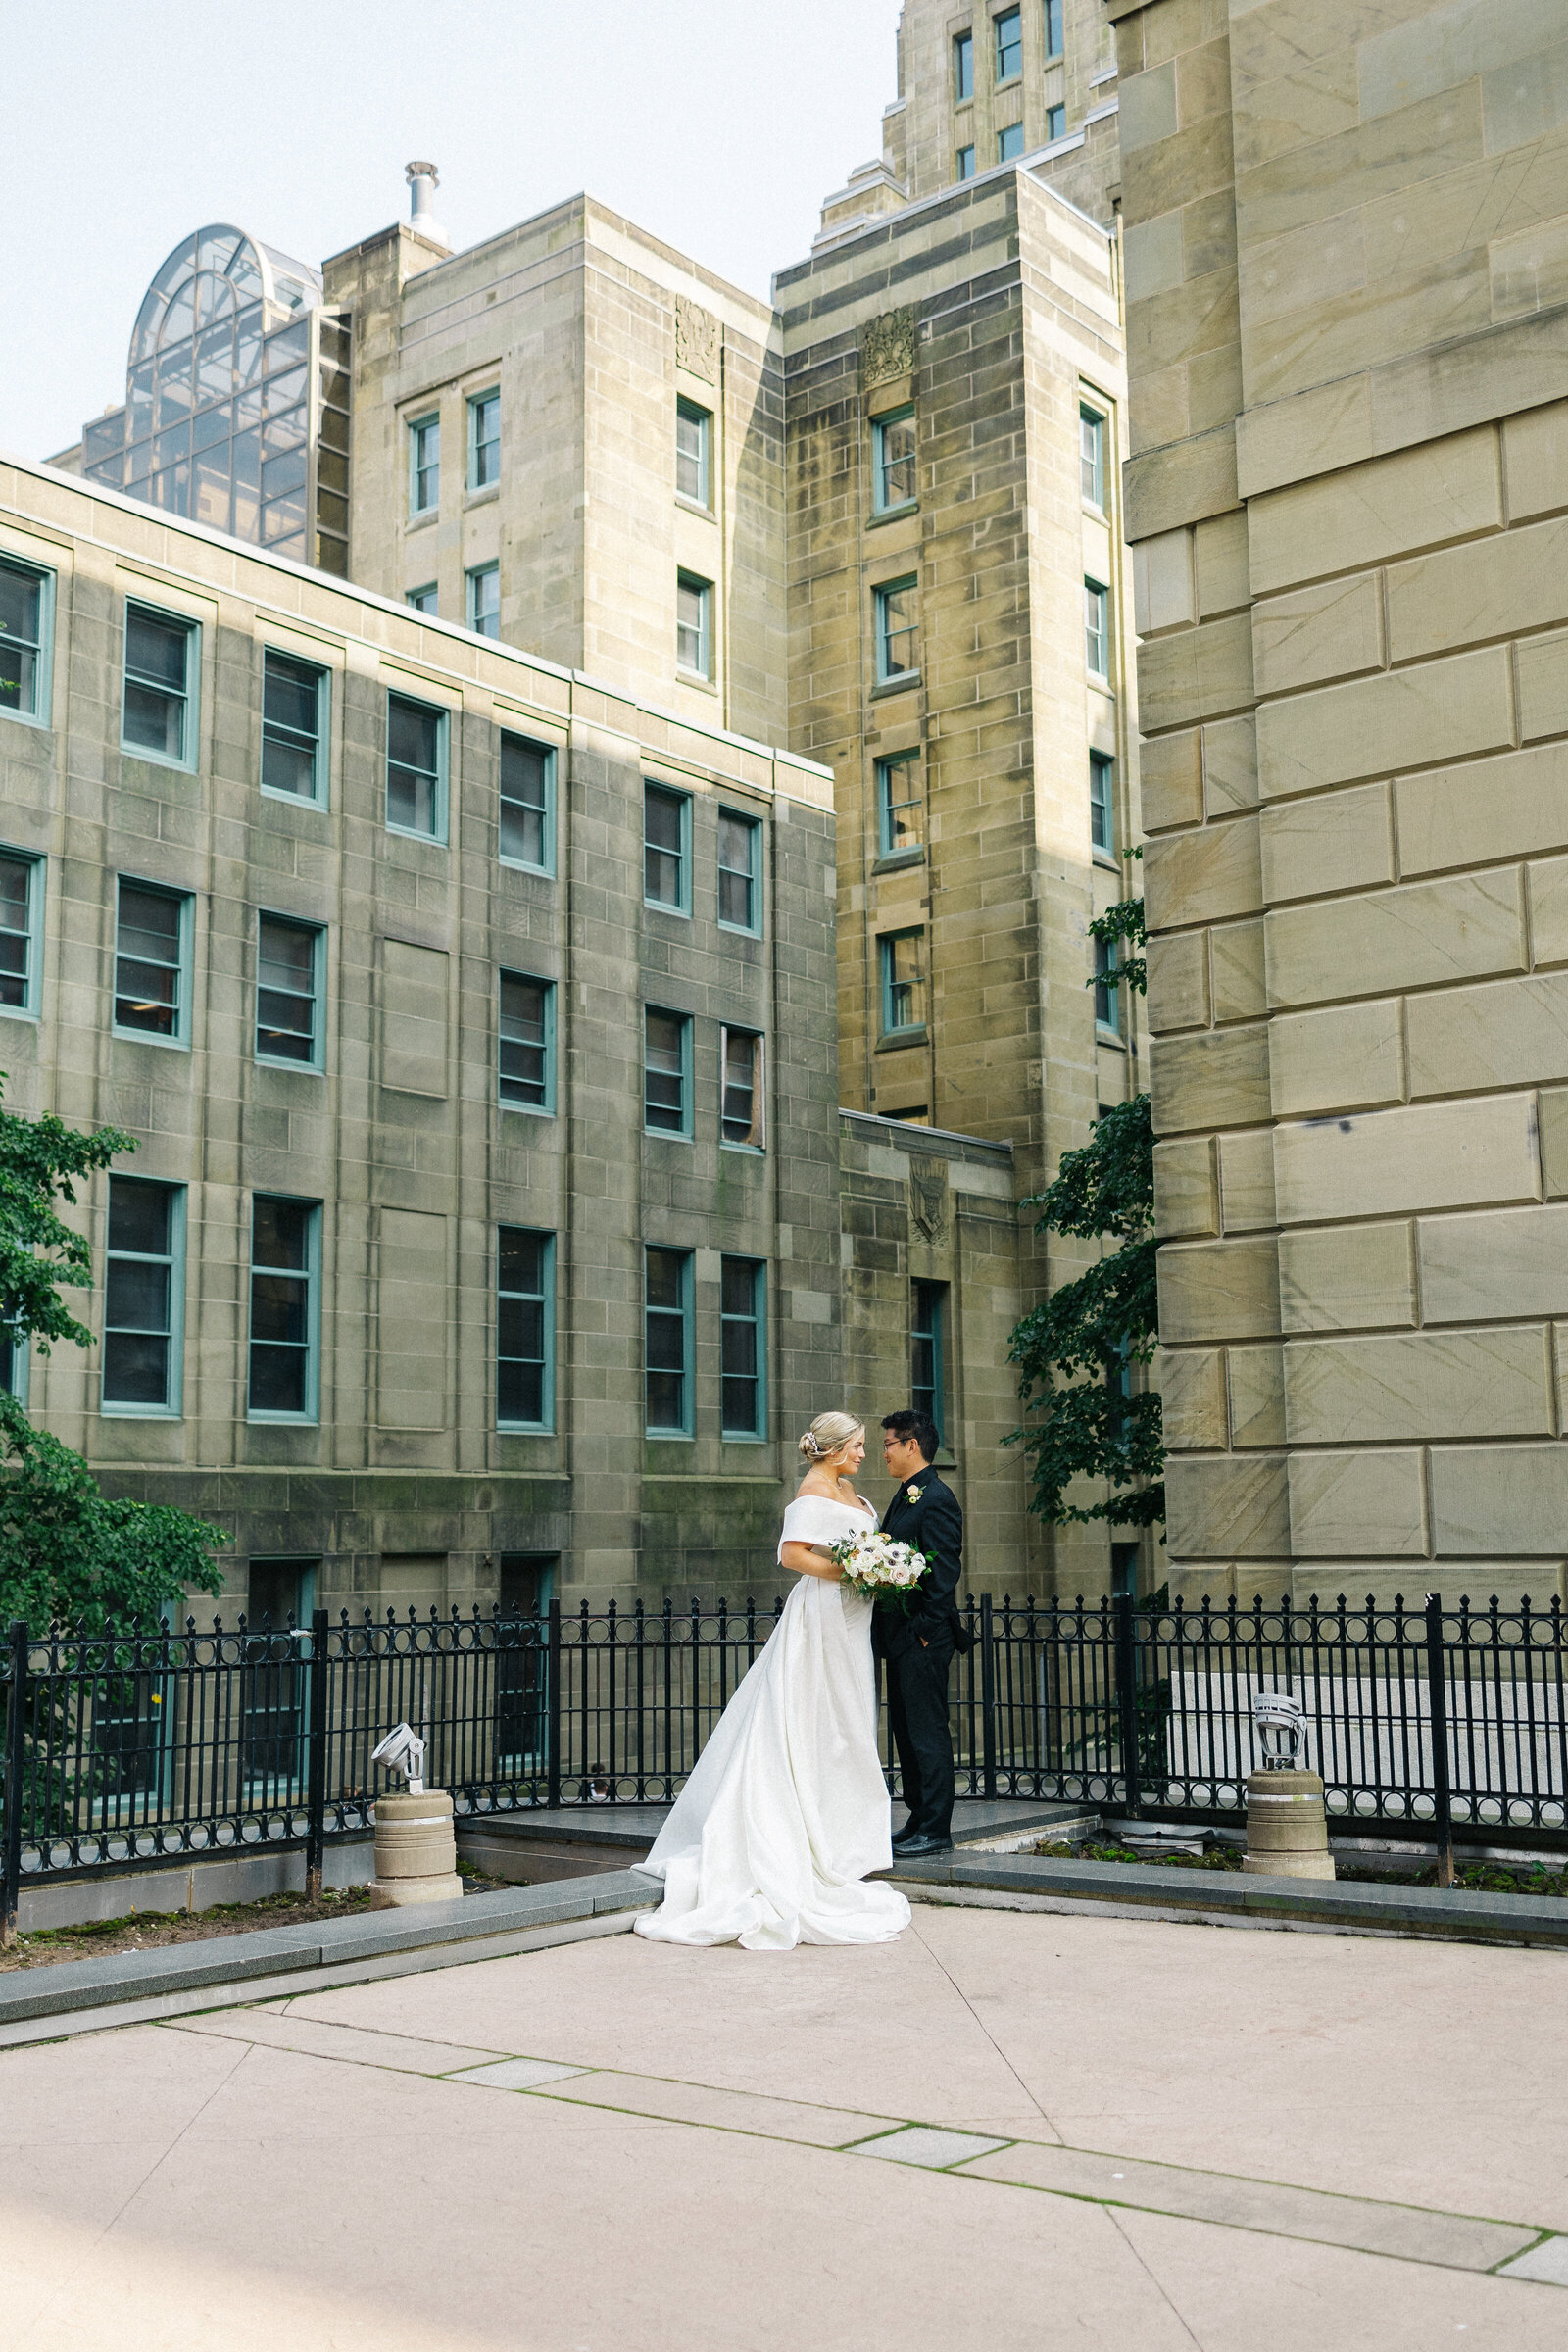 Terri-Lynn Warren Photography Downtown Halifax Wedding and Engagement Photographer The Prince George Hotel-8444